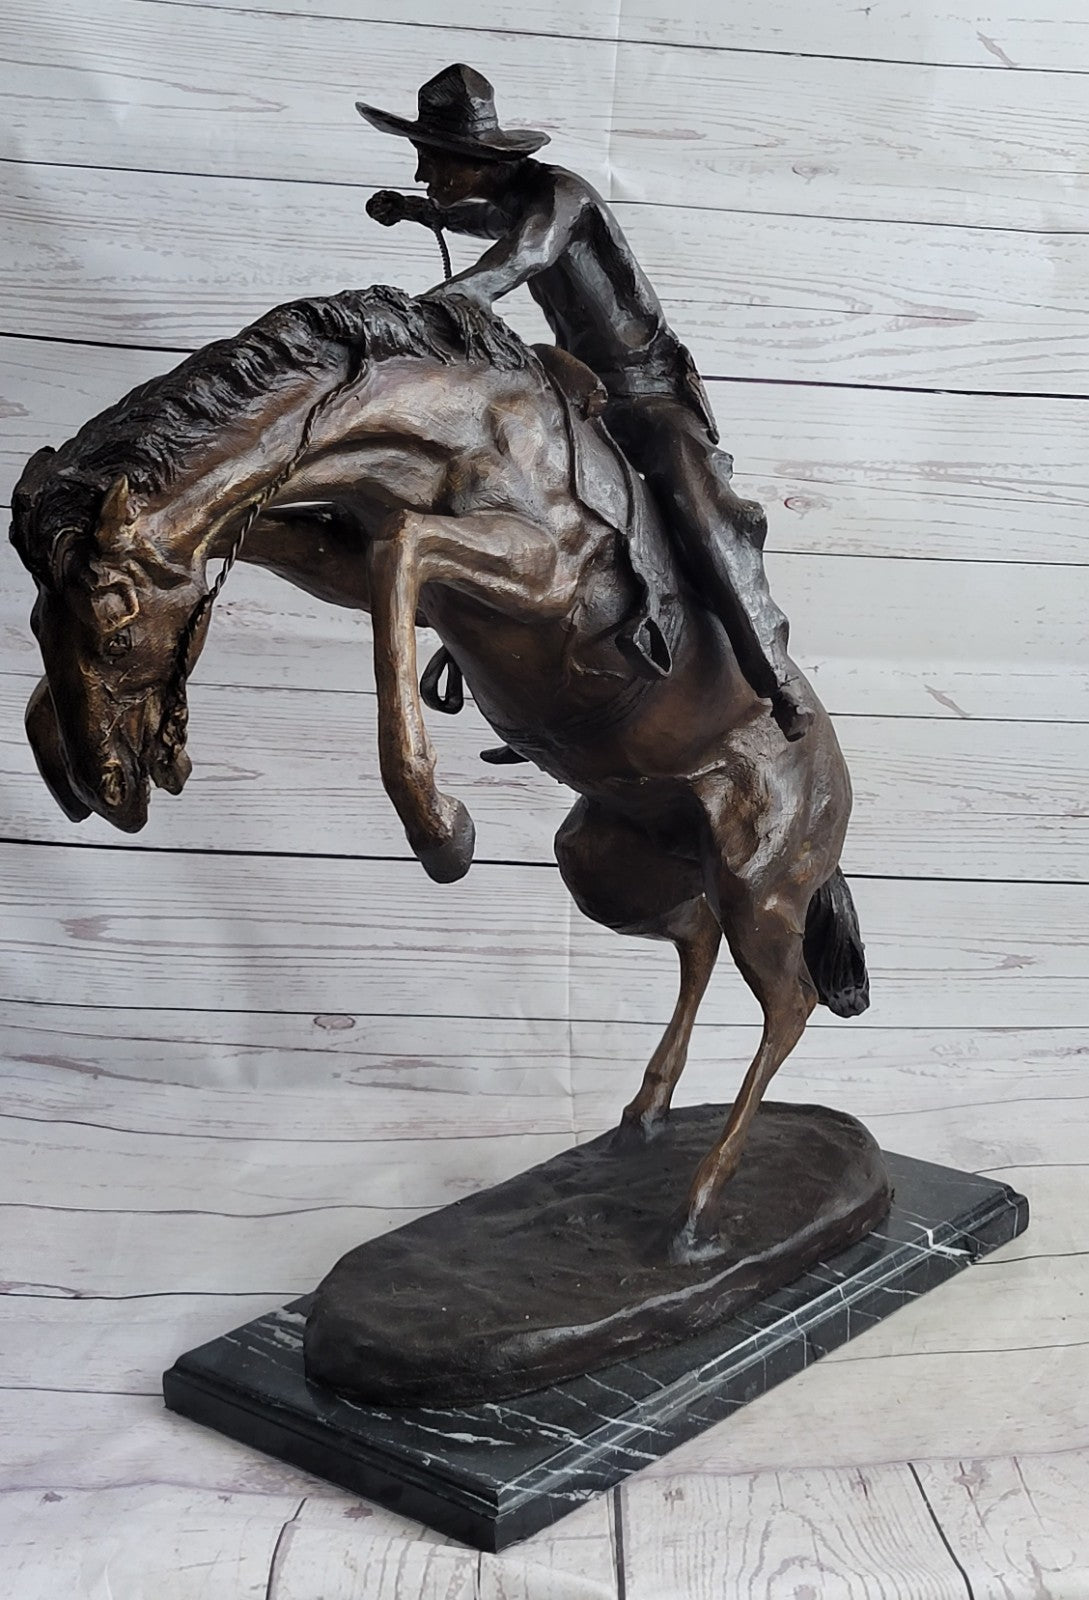 Bronze Sculpture White House Oval Office Bronco Buster by Remington Hot Cast Art